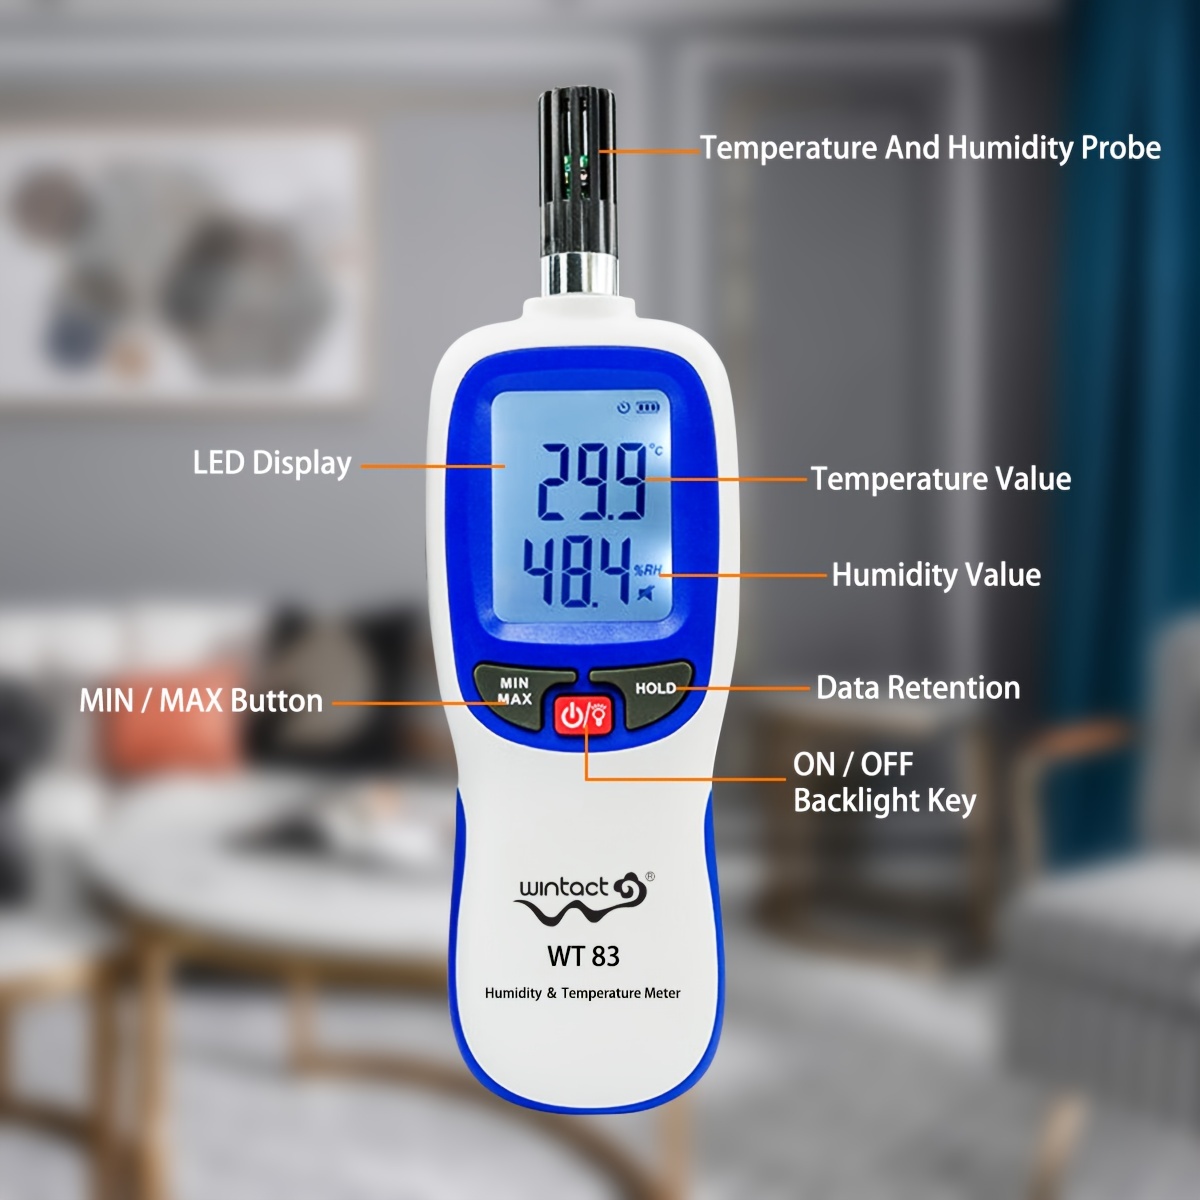 Wintact Digital Thermometer Hygrometer, Temperature Humidity Monitor Meter  for Indoor Outdoor Home, Bedroom, Baby Room, Office, Greenhouse, Cellar